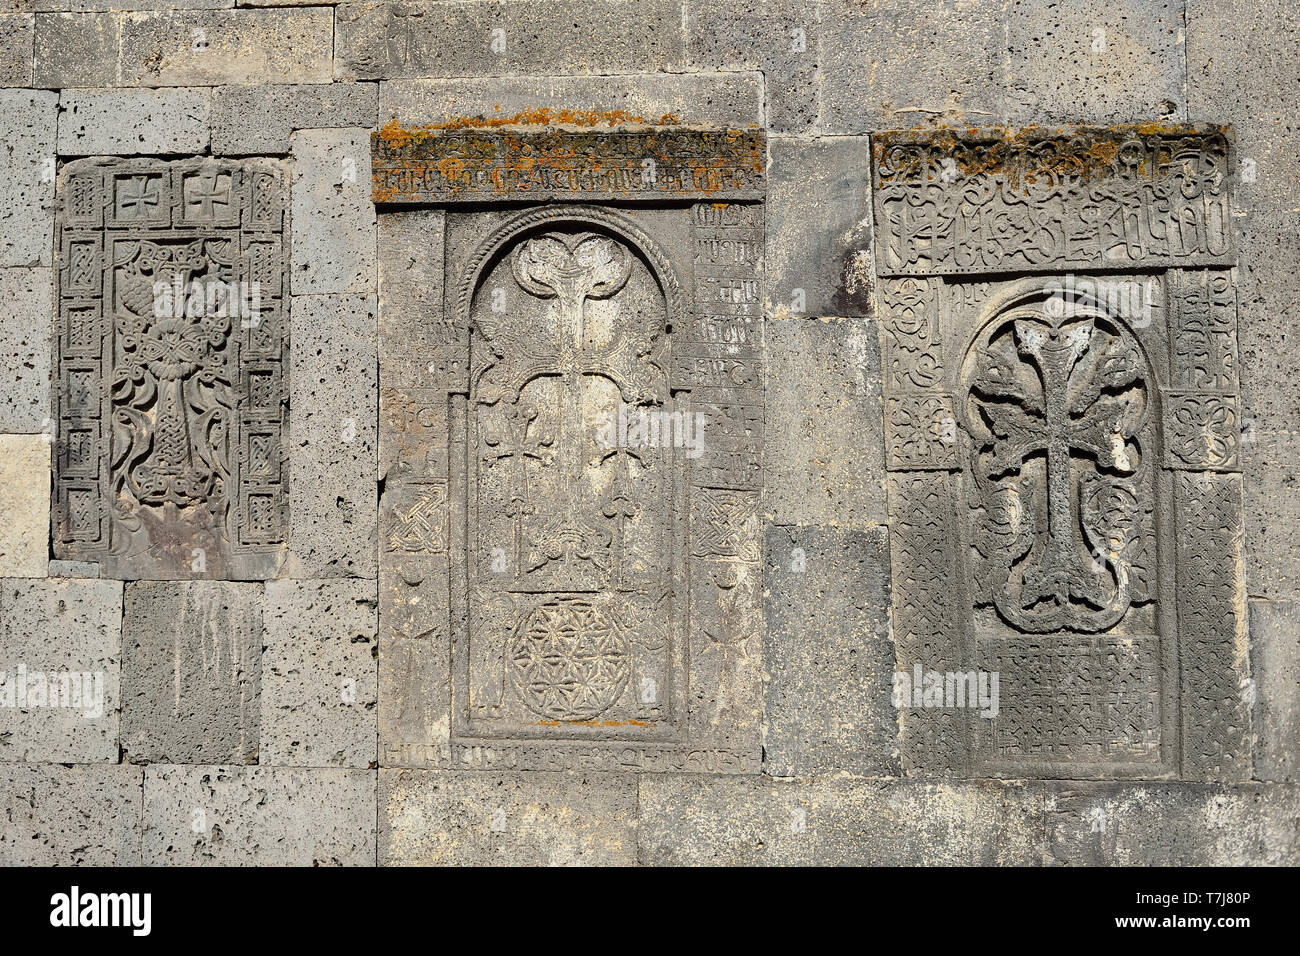 Cross scuplture detail in the Tatev monastery, one of the oldest and most famous monastery complexes in Armenia. Stock Photo